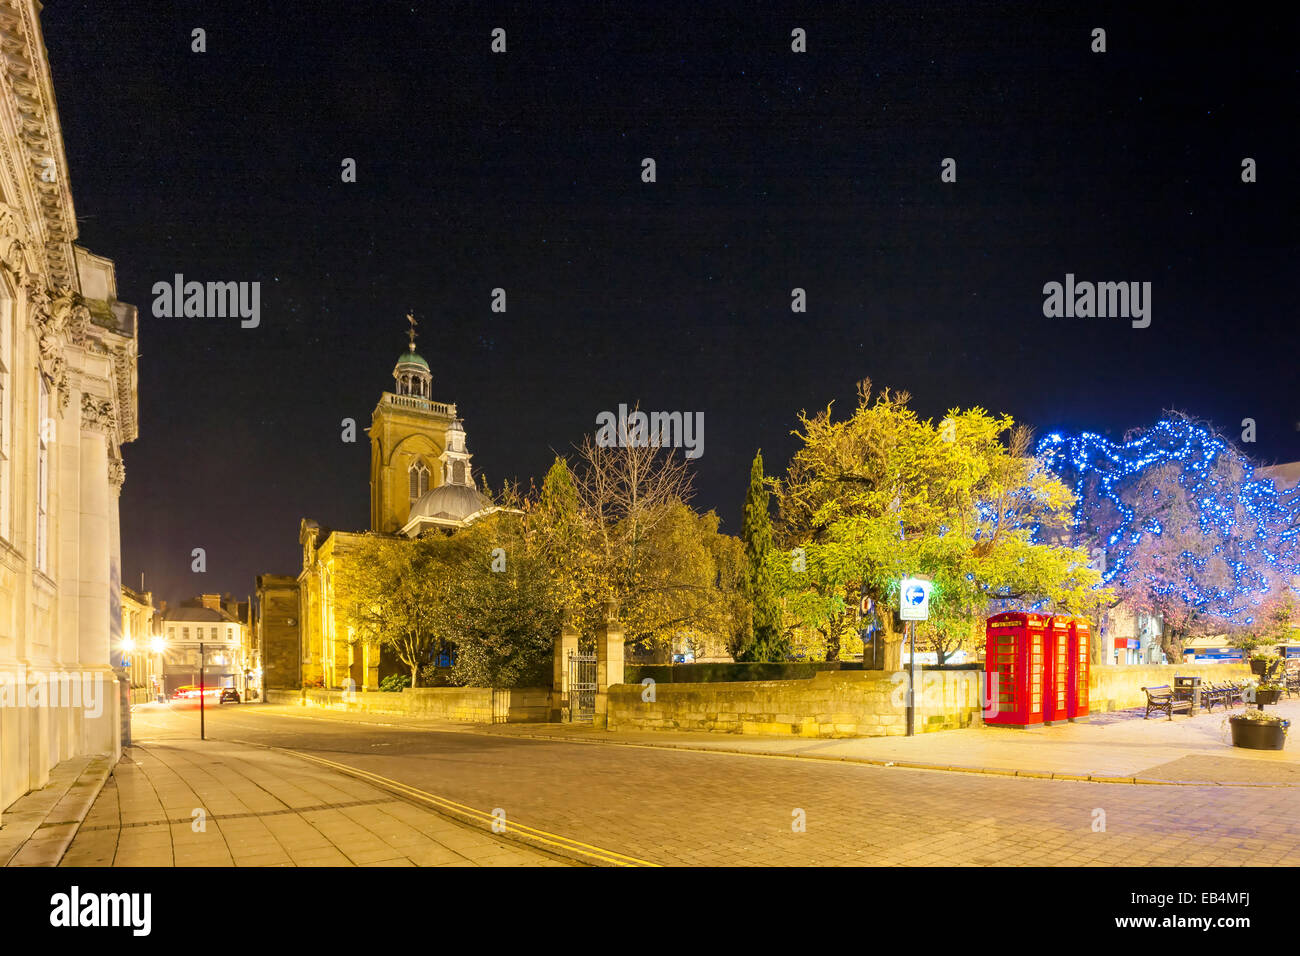 All Saints Church Northampton Town Centre in the early hours of the morning Stock Photo